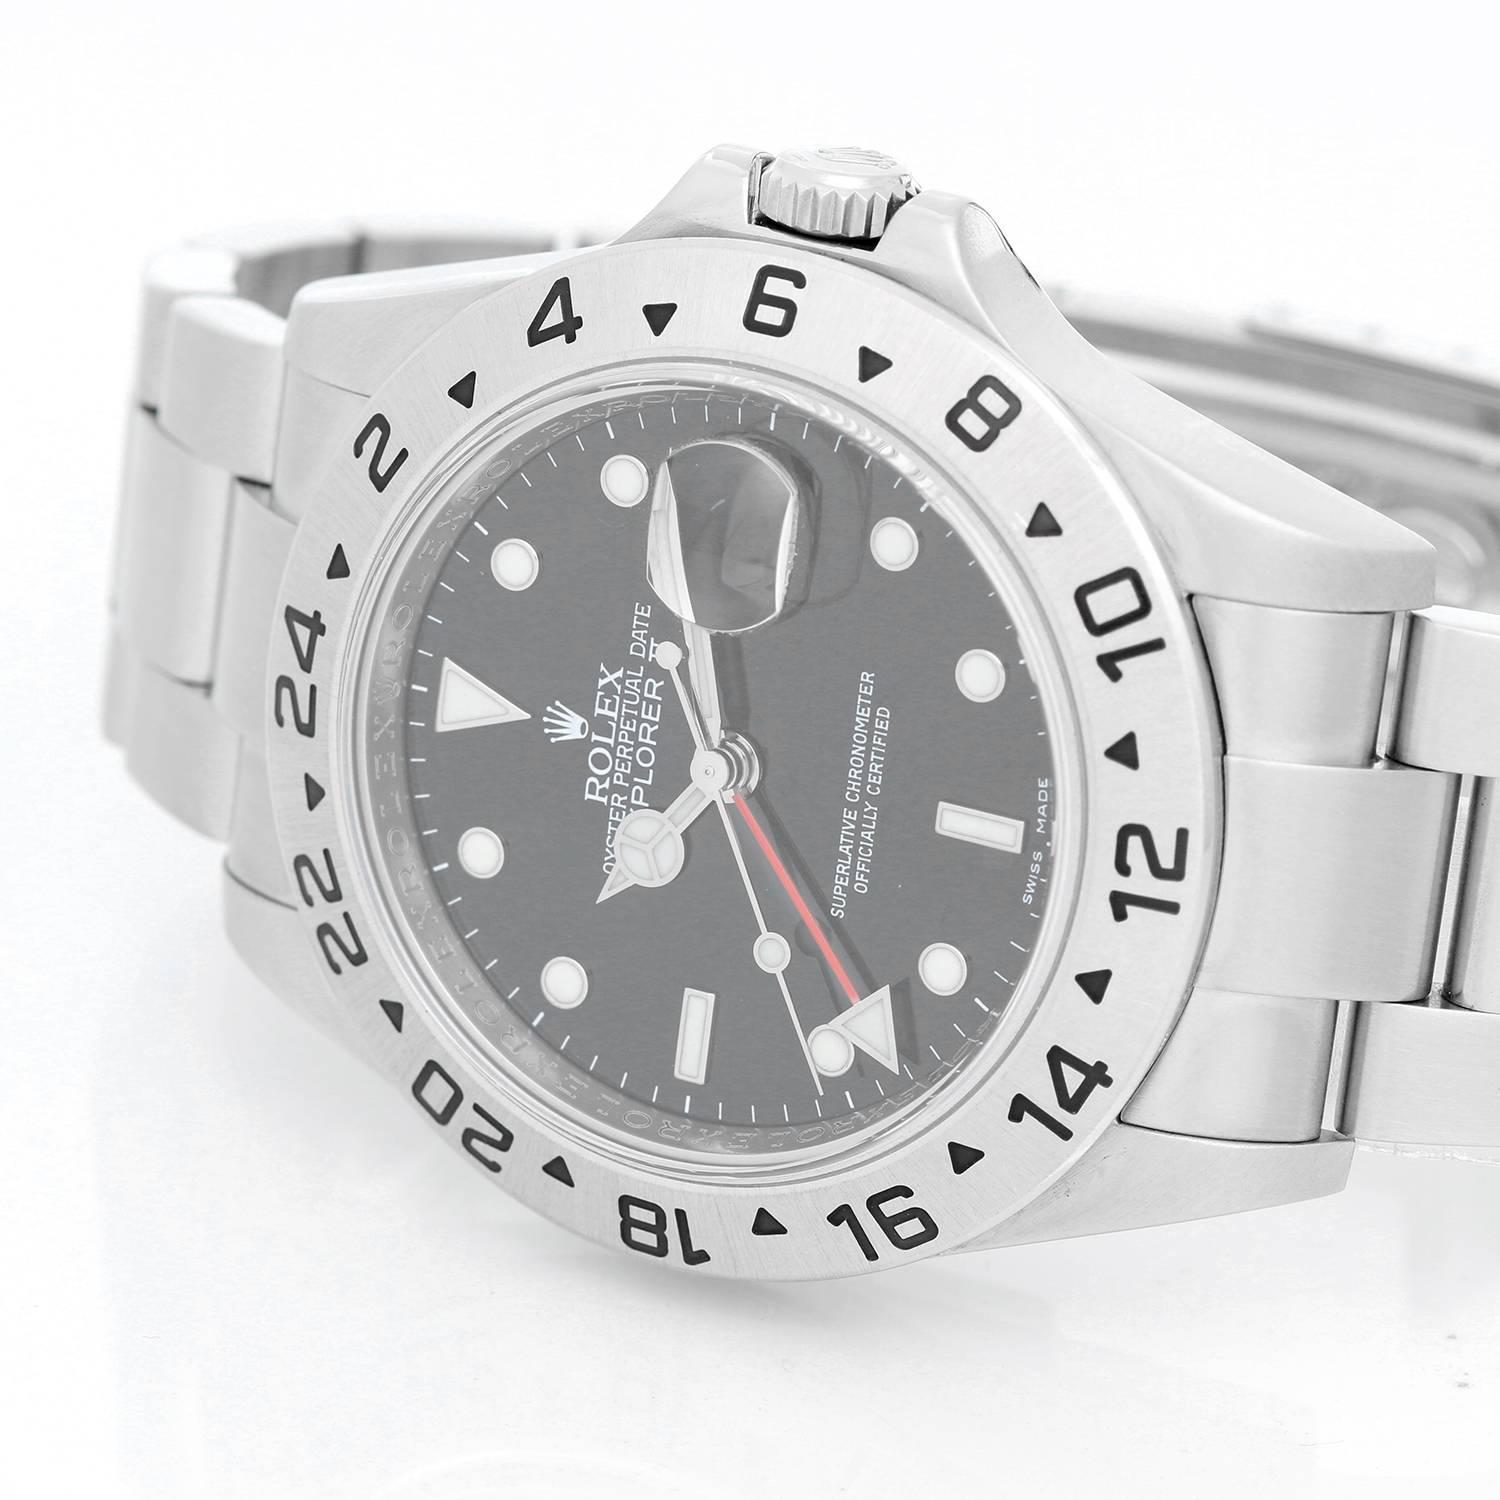 Discontinued Rolex Explorer  Men's Stainless Steel Watch 16570 -  Automatic winding, 31 jewels, Quickset, sapphire crystal, dual time. Stainless steel case (42mm diameter). Black dial with luminous markers. Stainless steel Oyster bracelet with